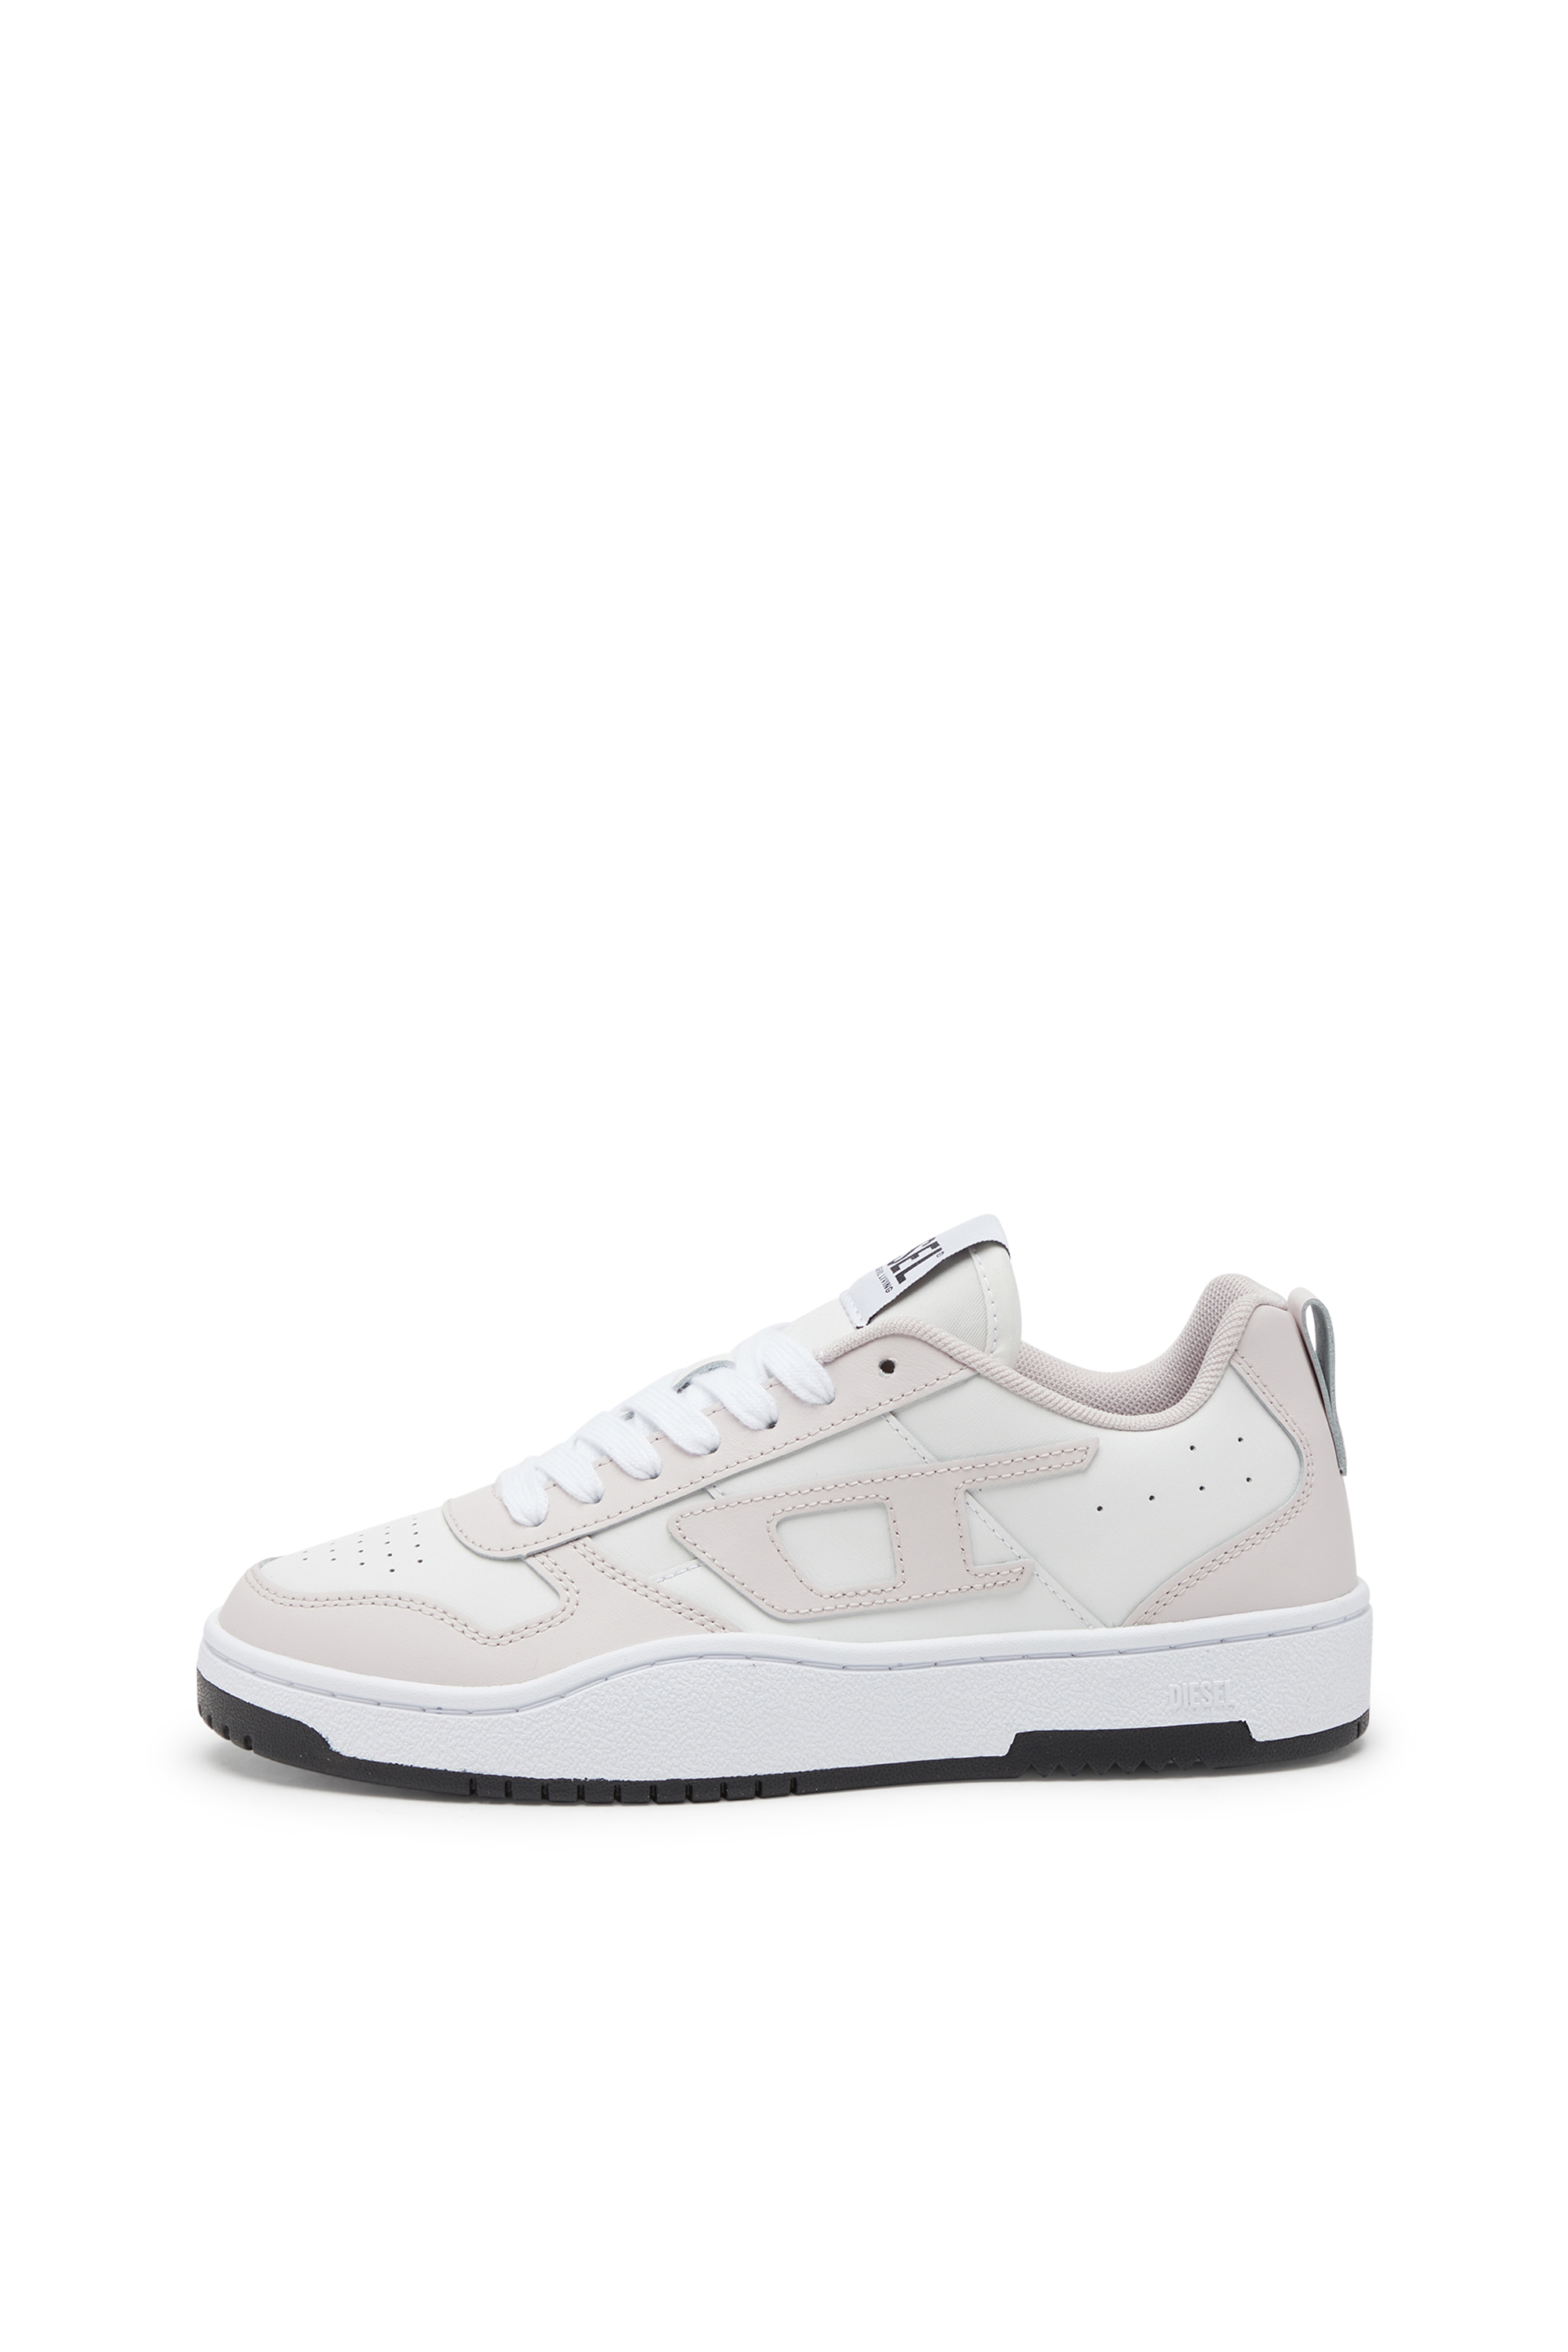 Diesel - S-UKIYO V2 LOW W, Woman S-Ukiyo Low-Low-top sneakers in leather and nylon in Multicolor - Image 7